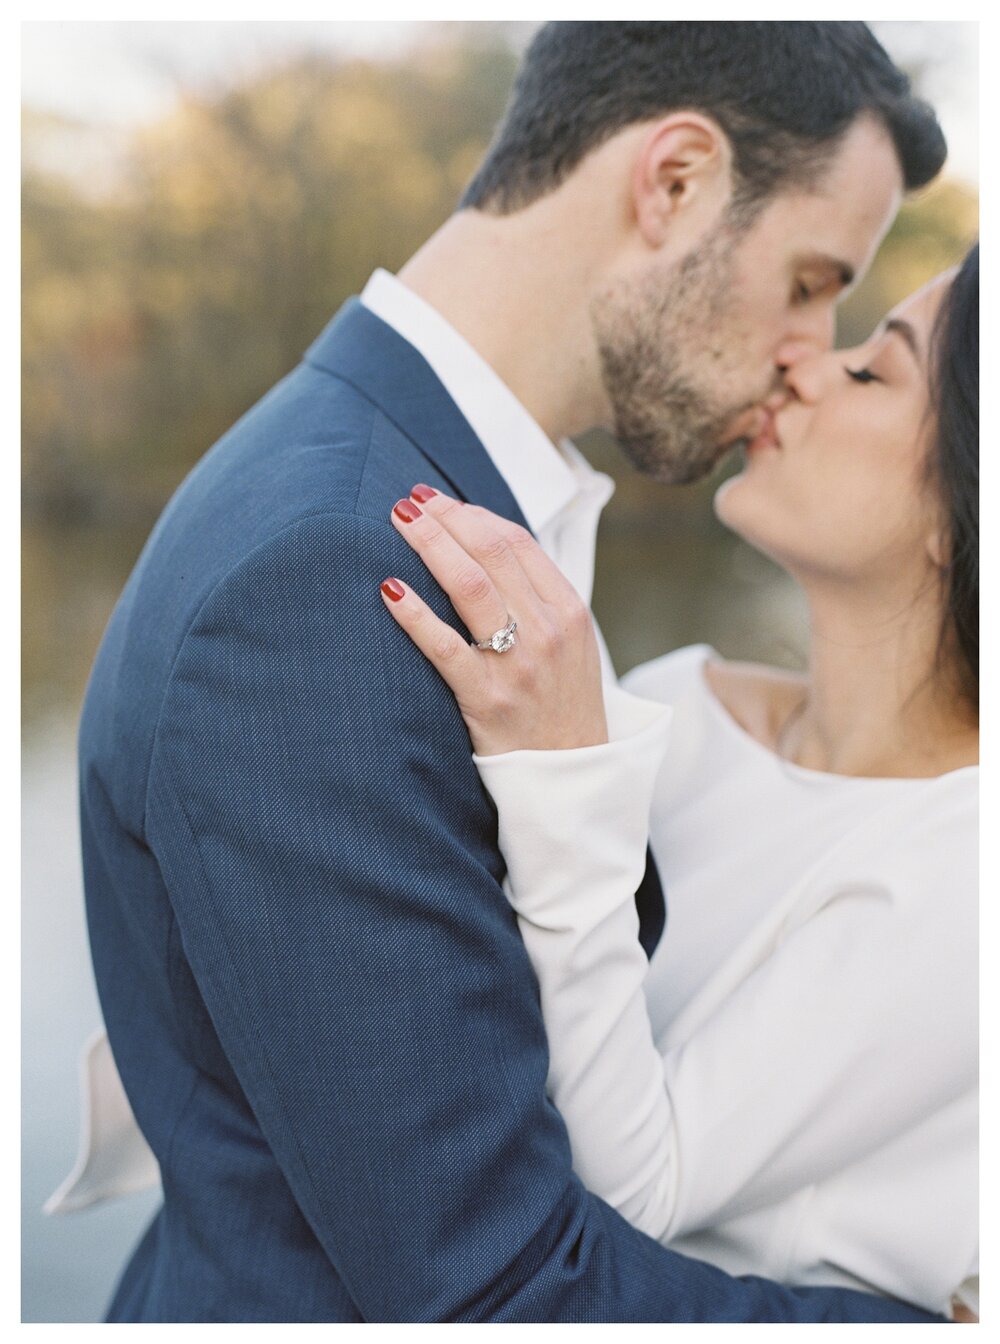  engagement photos in central park, engagement kiss, engagement ring 